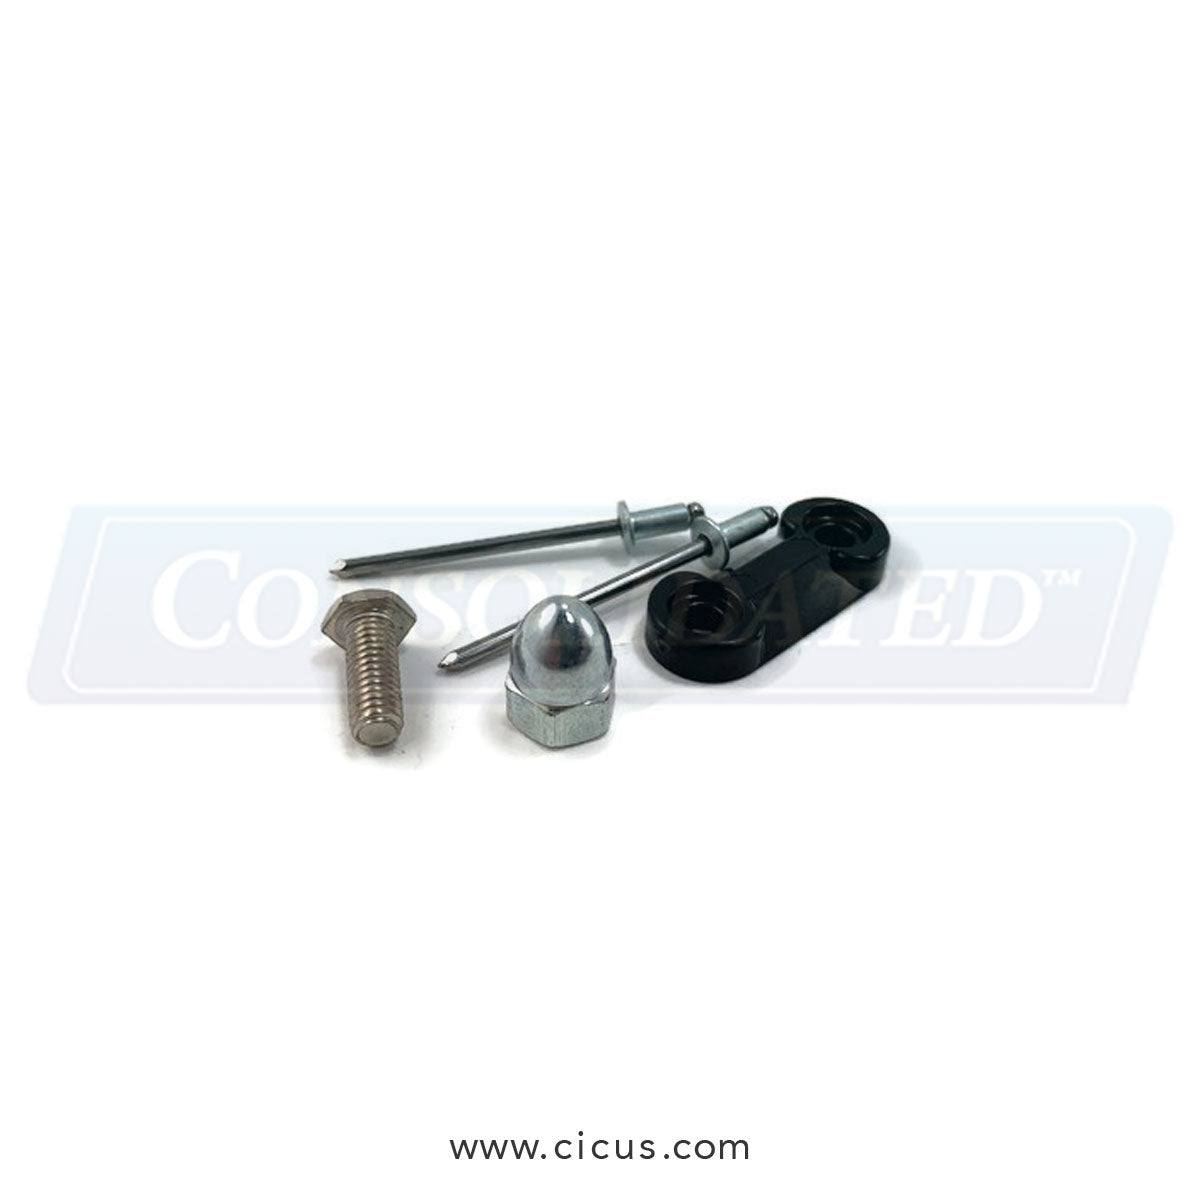 Cissell / Alliance Laundry Door Catch Assembly [TU5158]